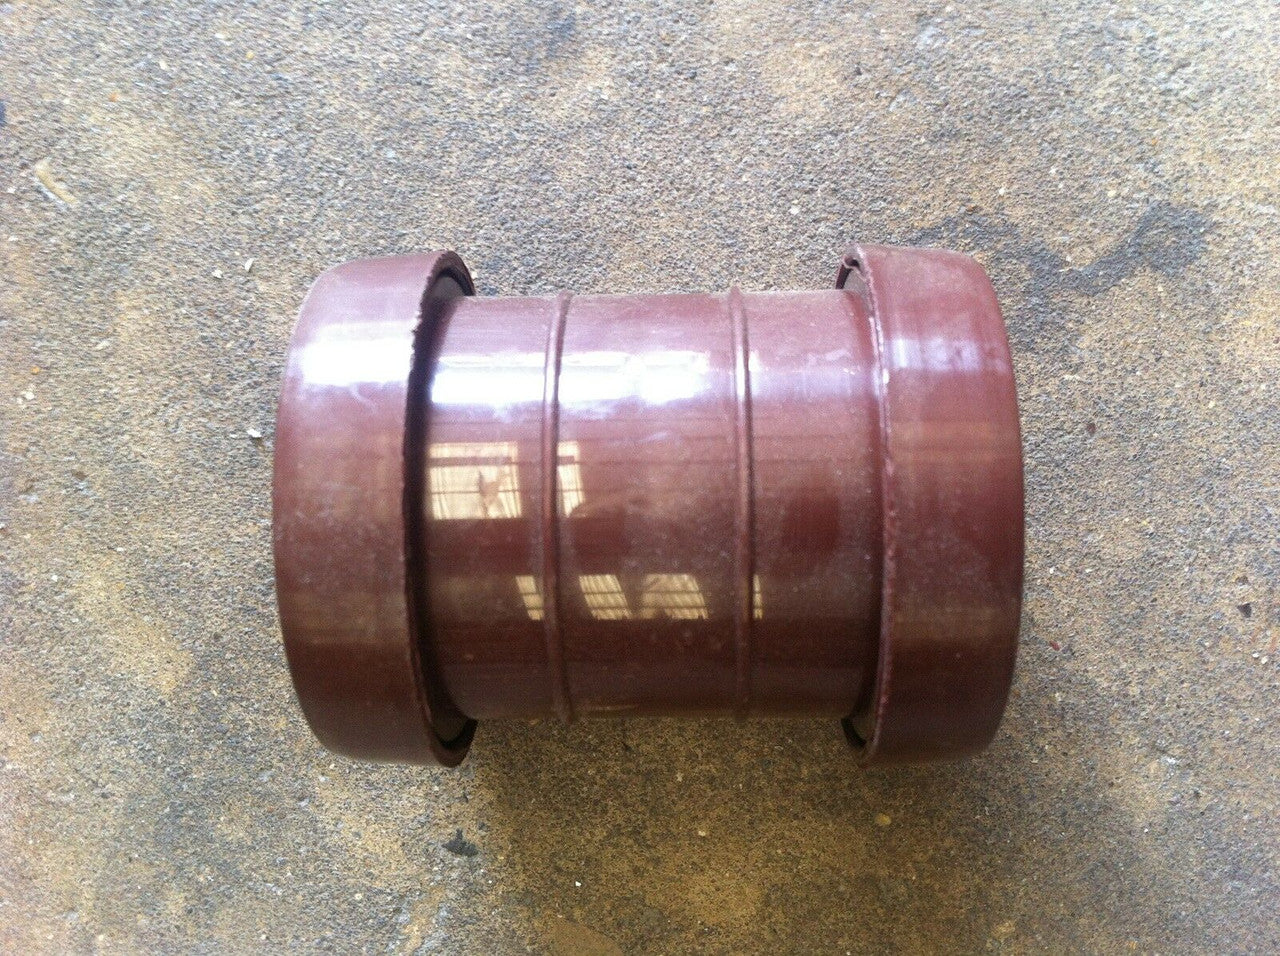 40mm Waste Pipe Straight Coupler - Brown Push-fit